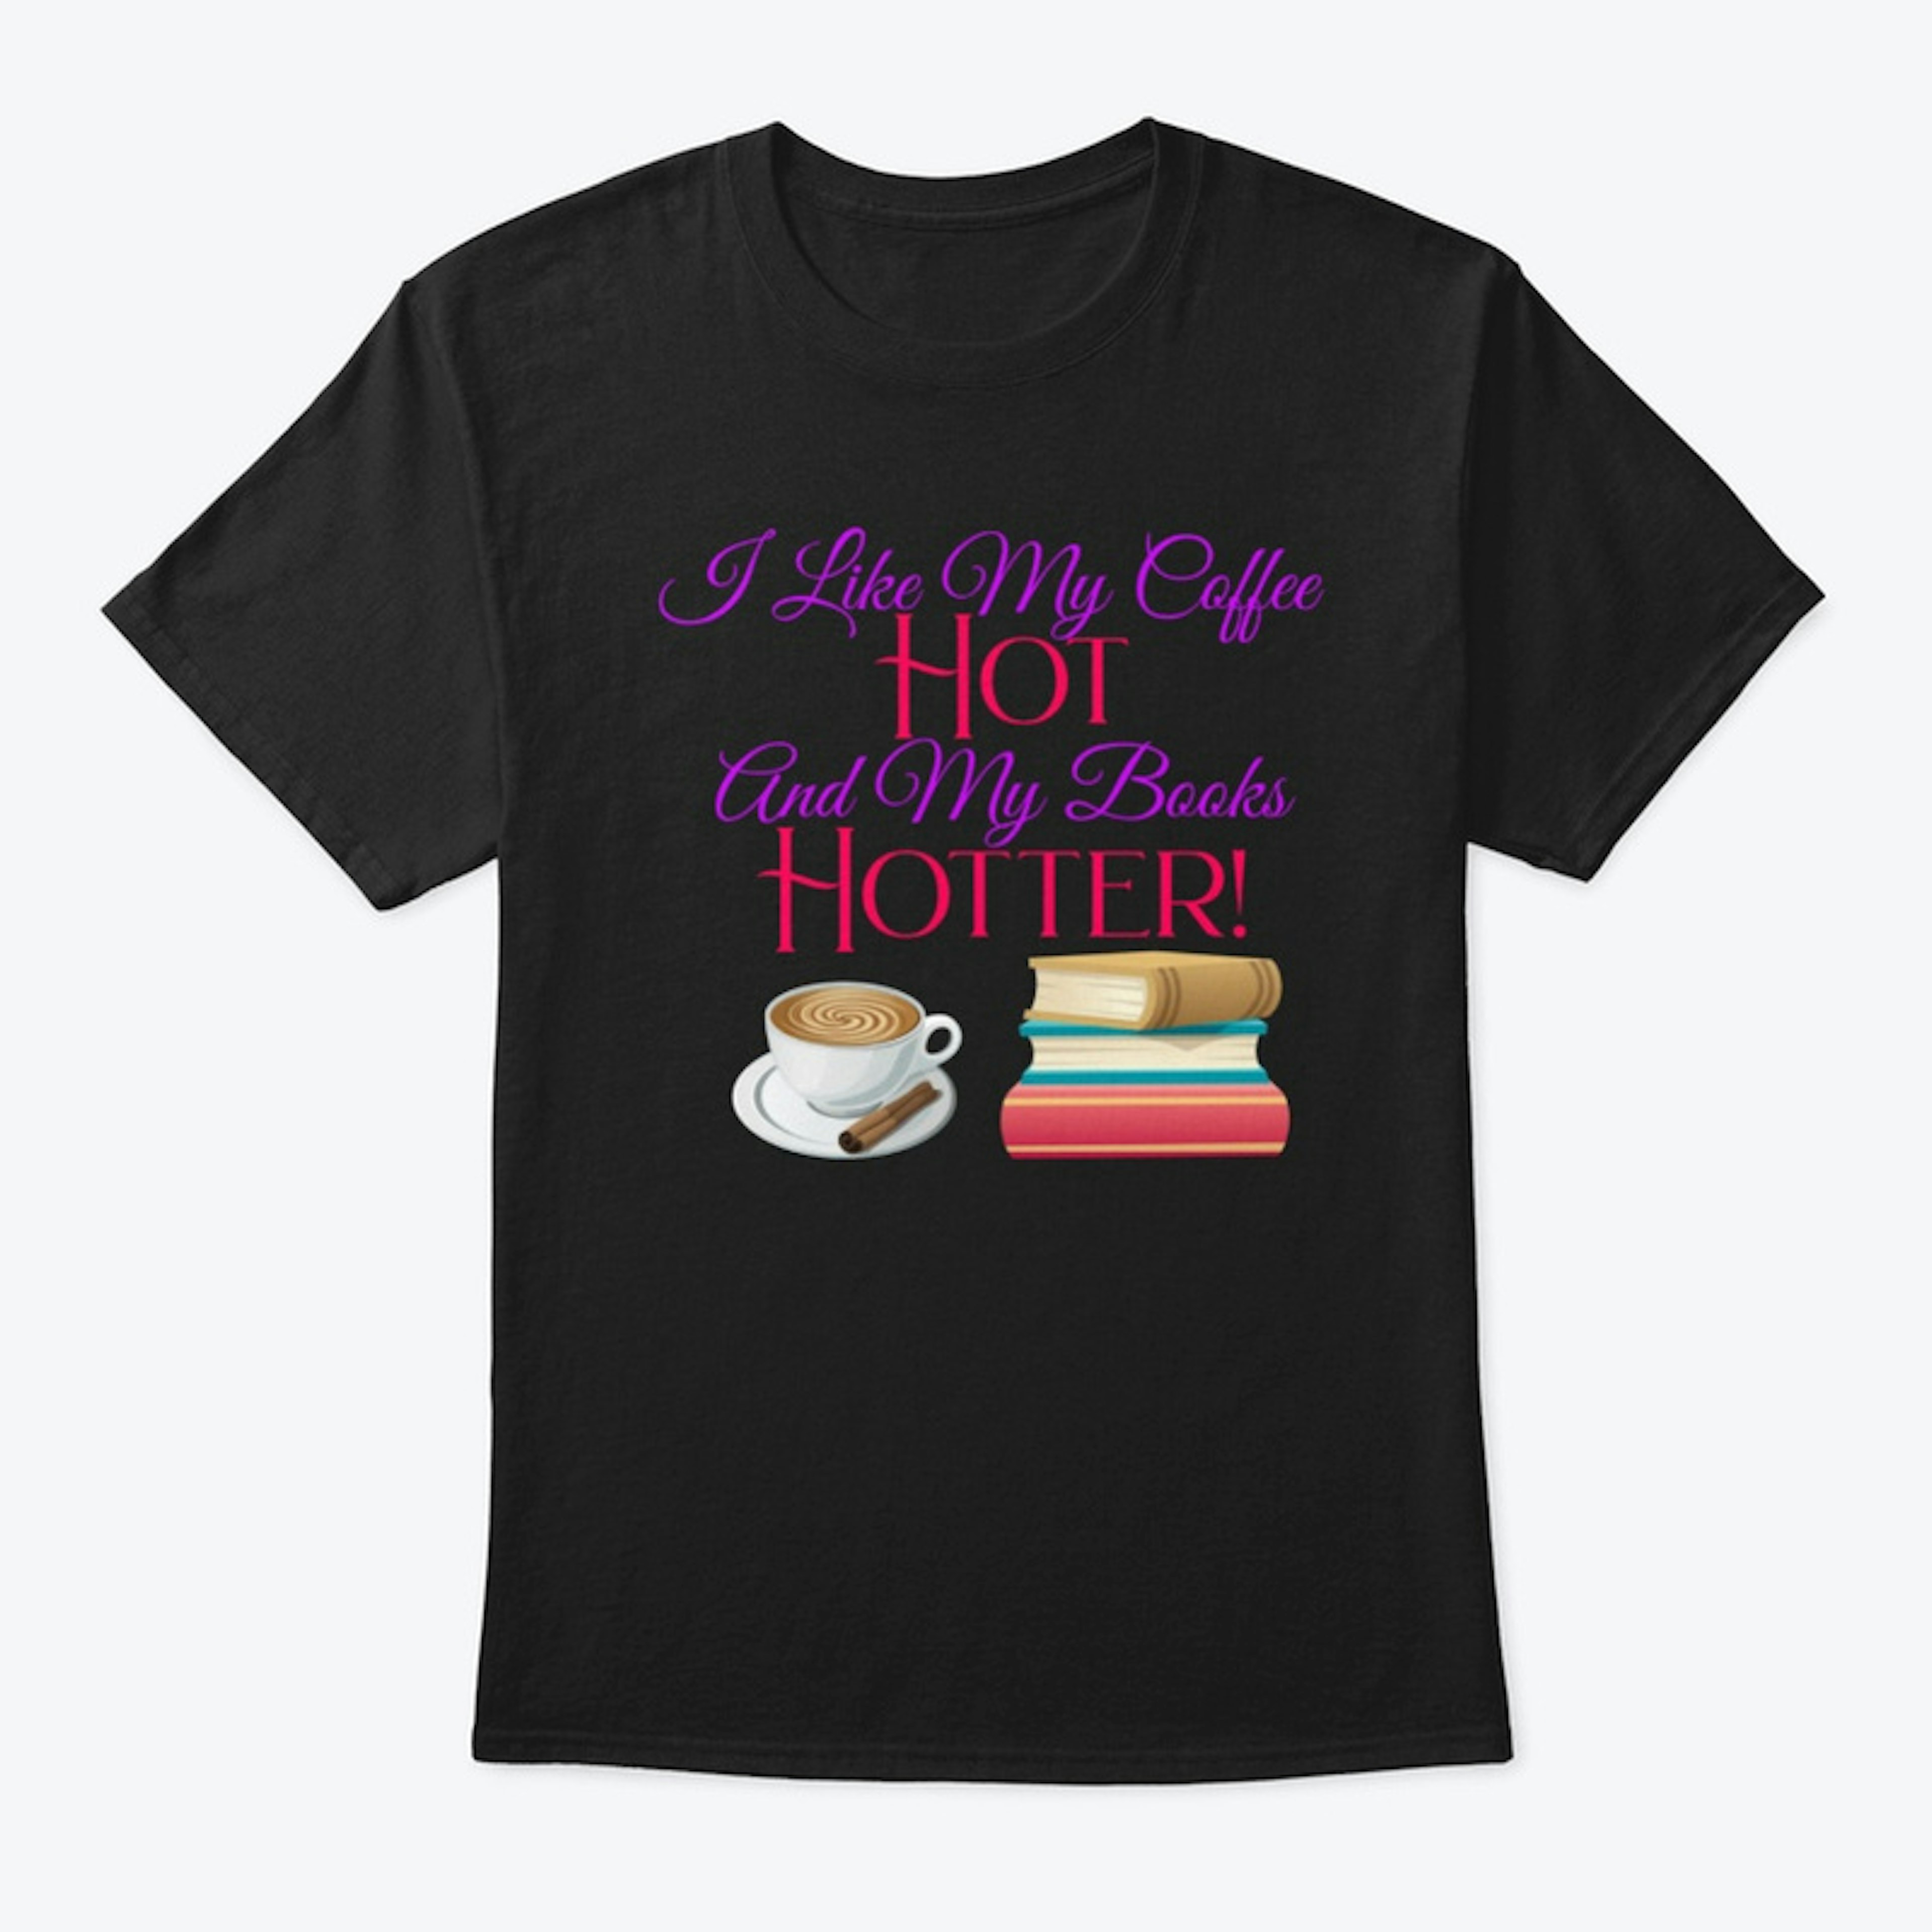 I Like My Coffee Hot and My Books Hotter